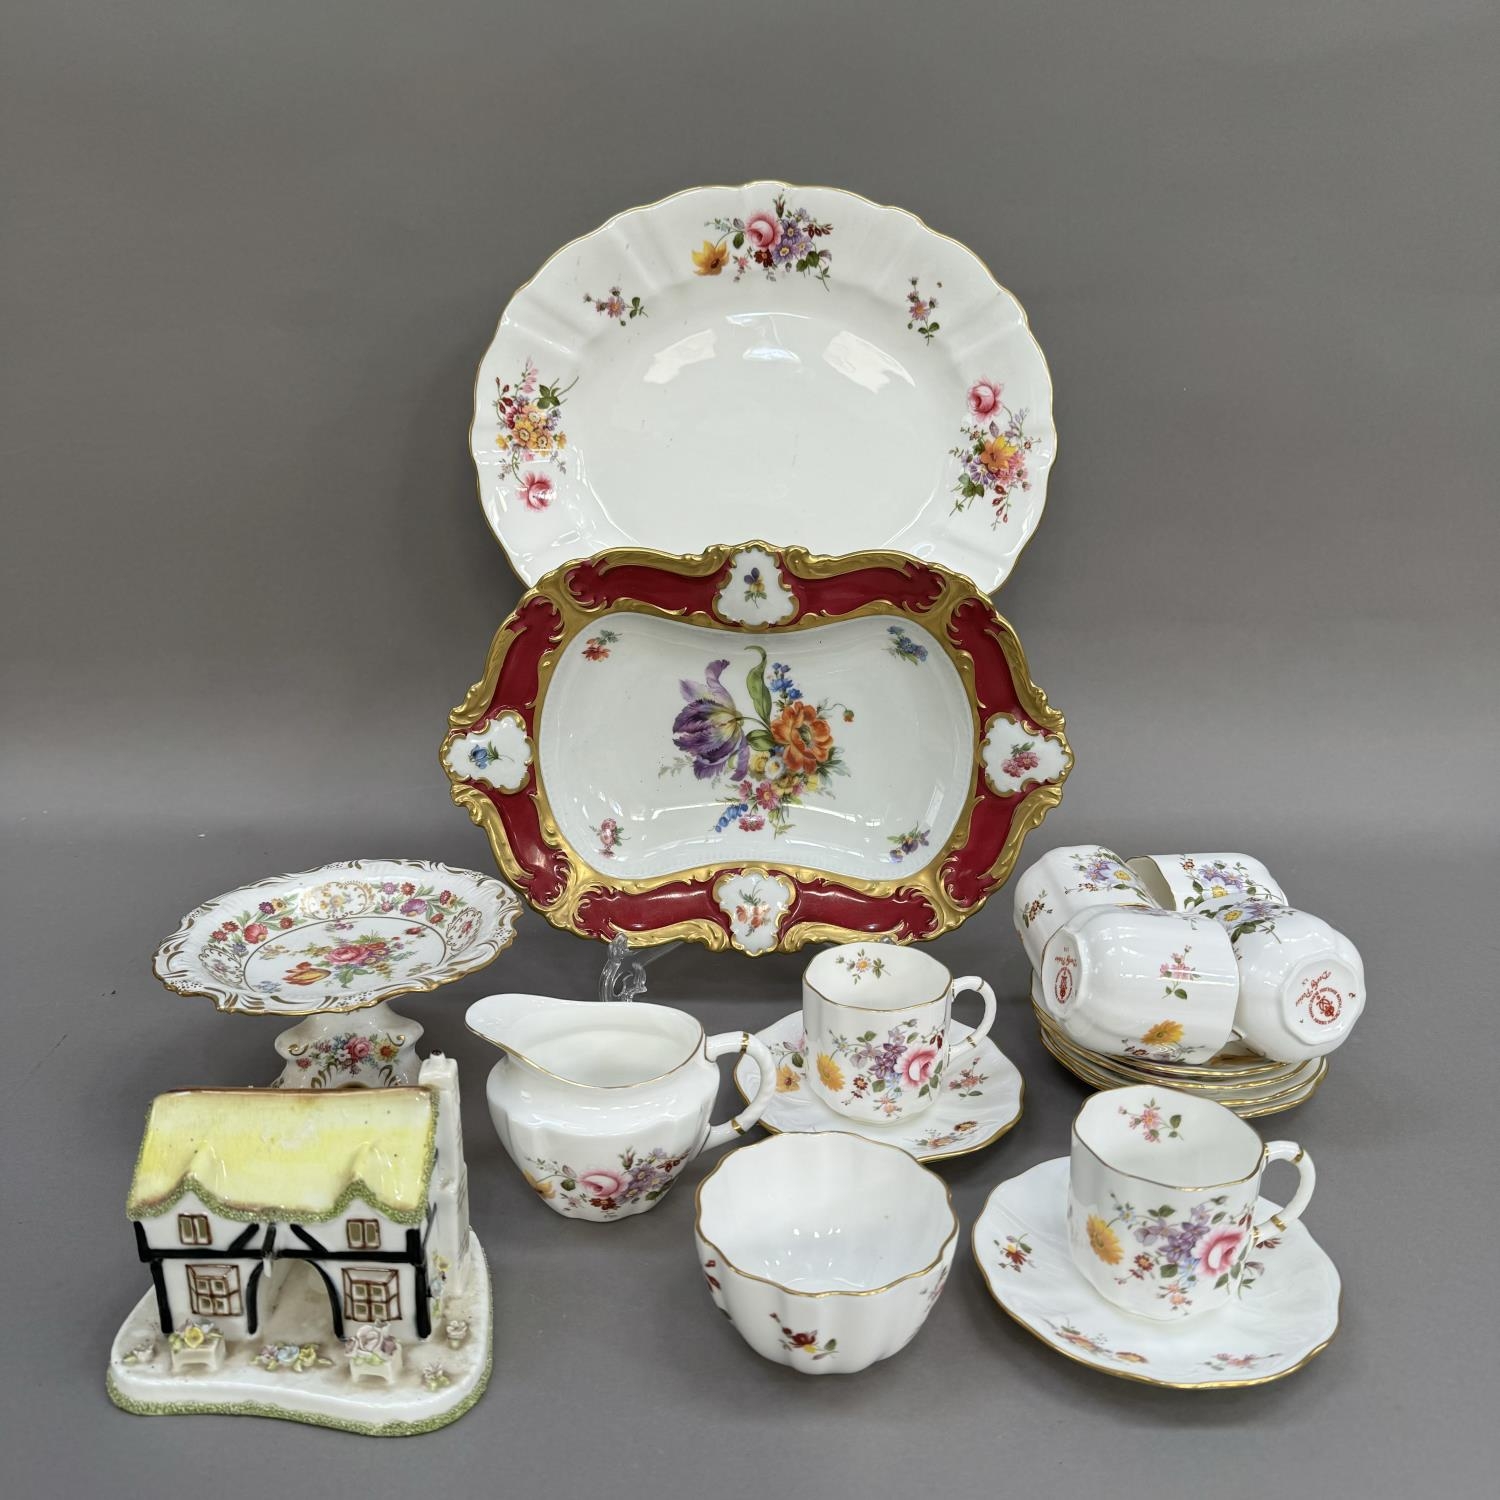 A Royal Crown Derby Posies tea services comprising sugar and cream, six cups, six saucers and a